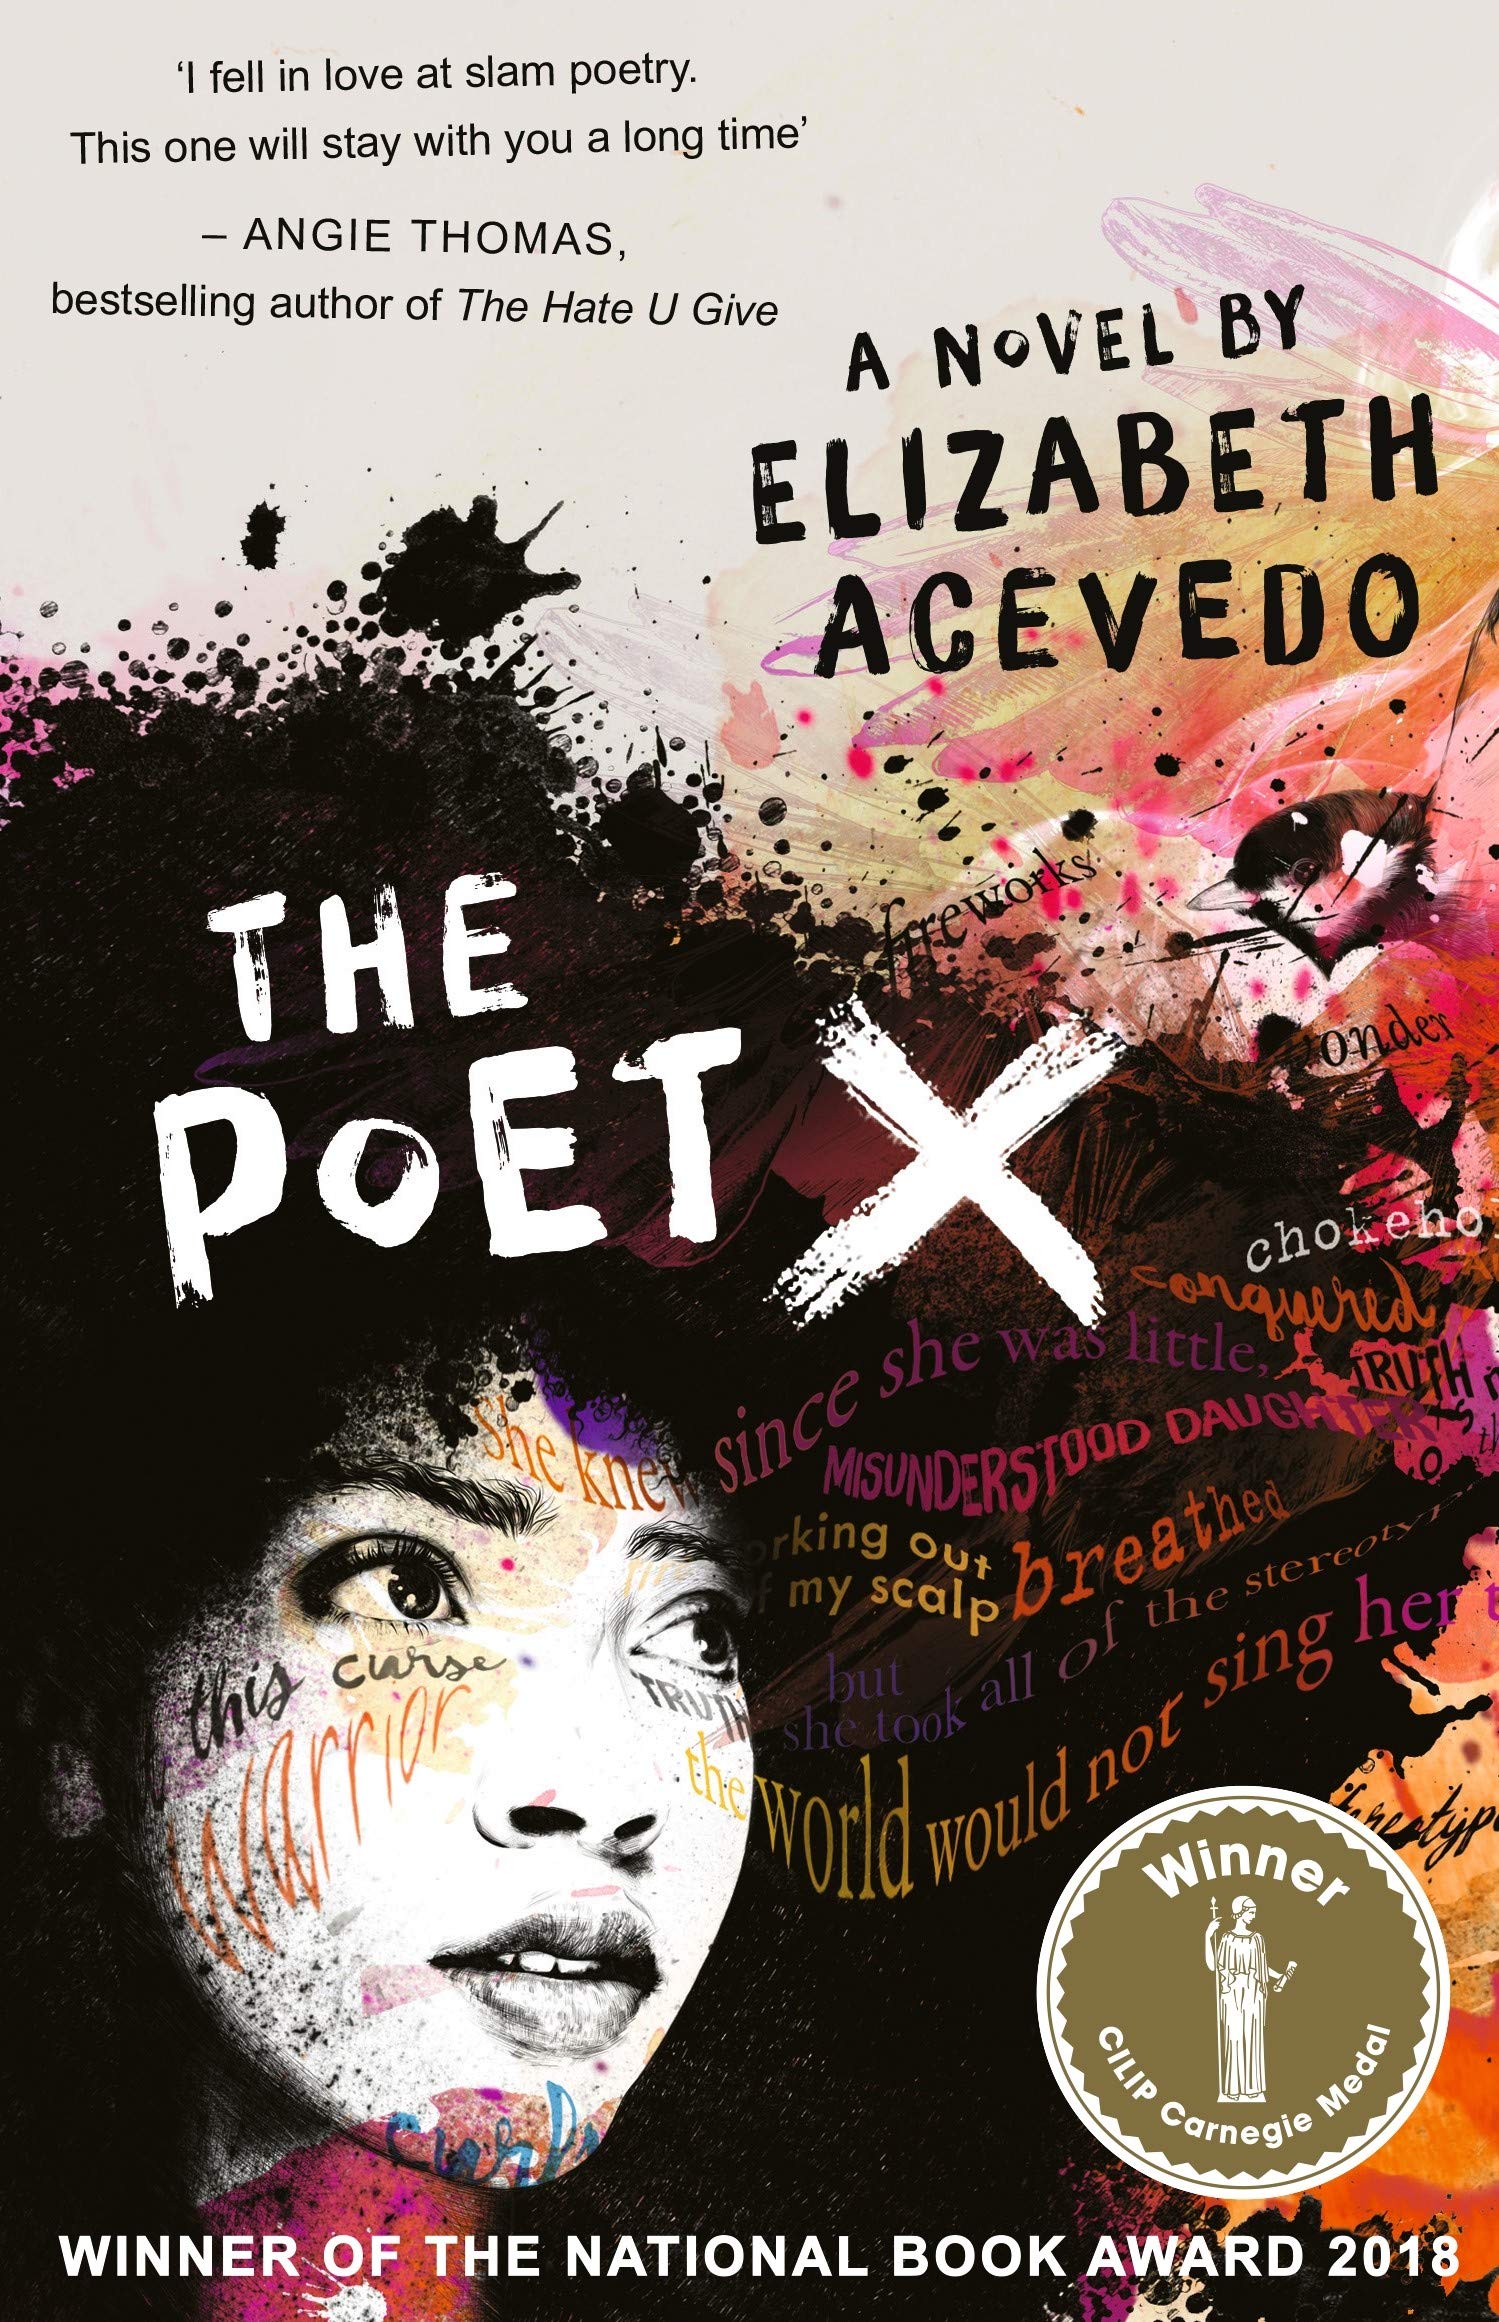 Picture of the book cover, which features a black and white illustration of a person with a lot of curly hair superimposed over splashes of color